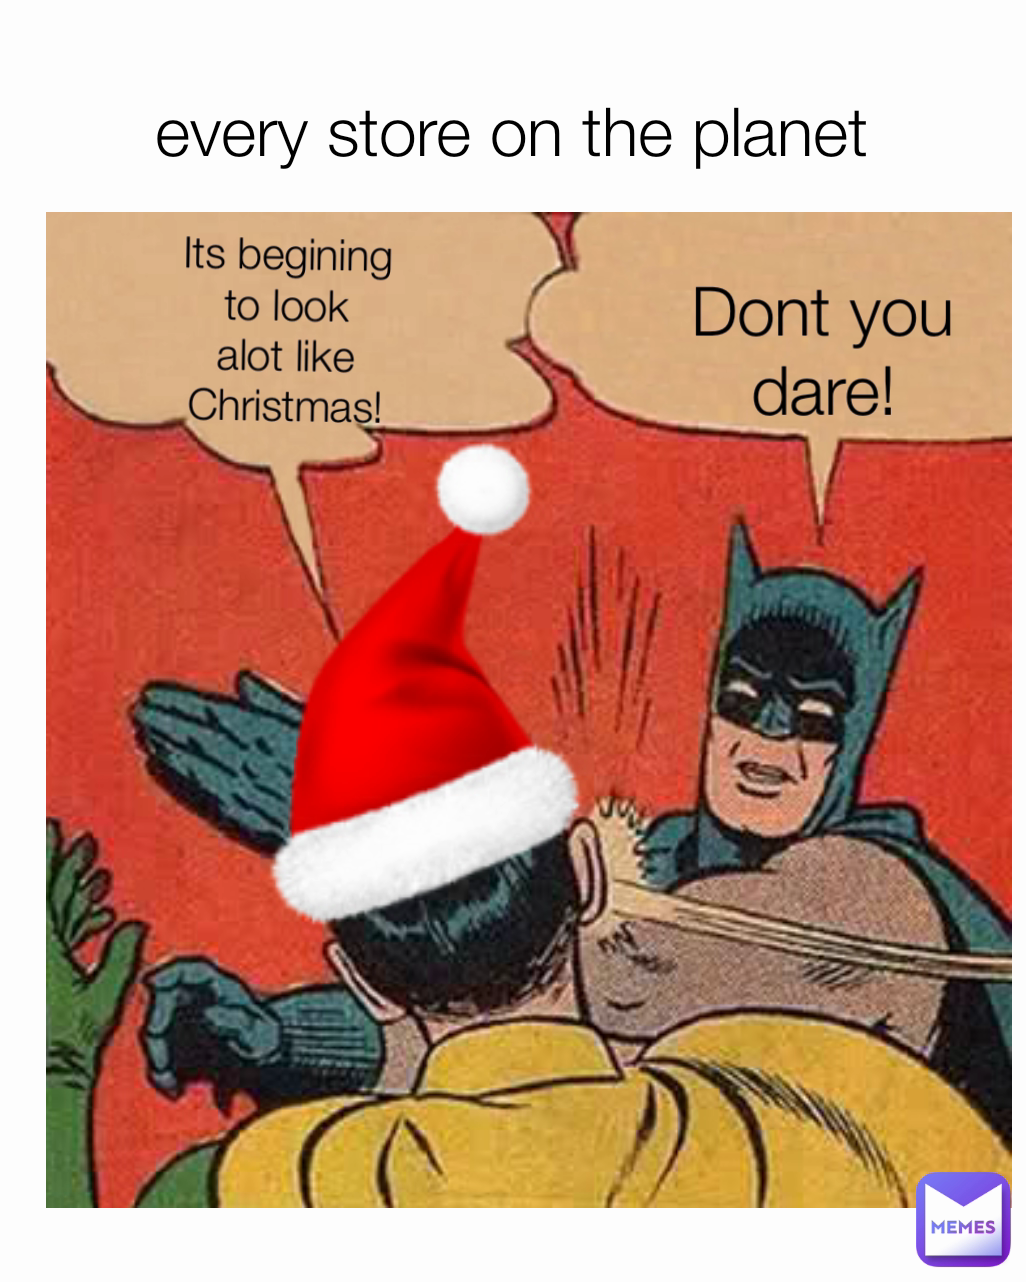 Dont you dare! Its begining to look alot like Christmas! every store on the planet